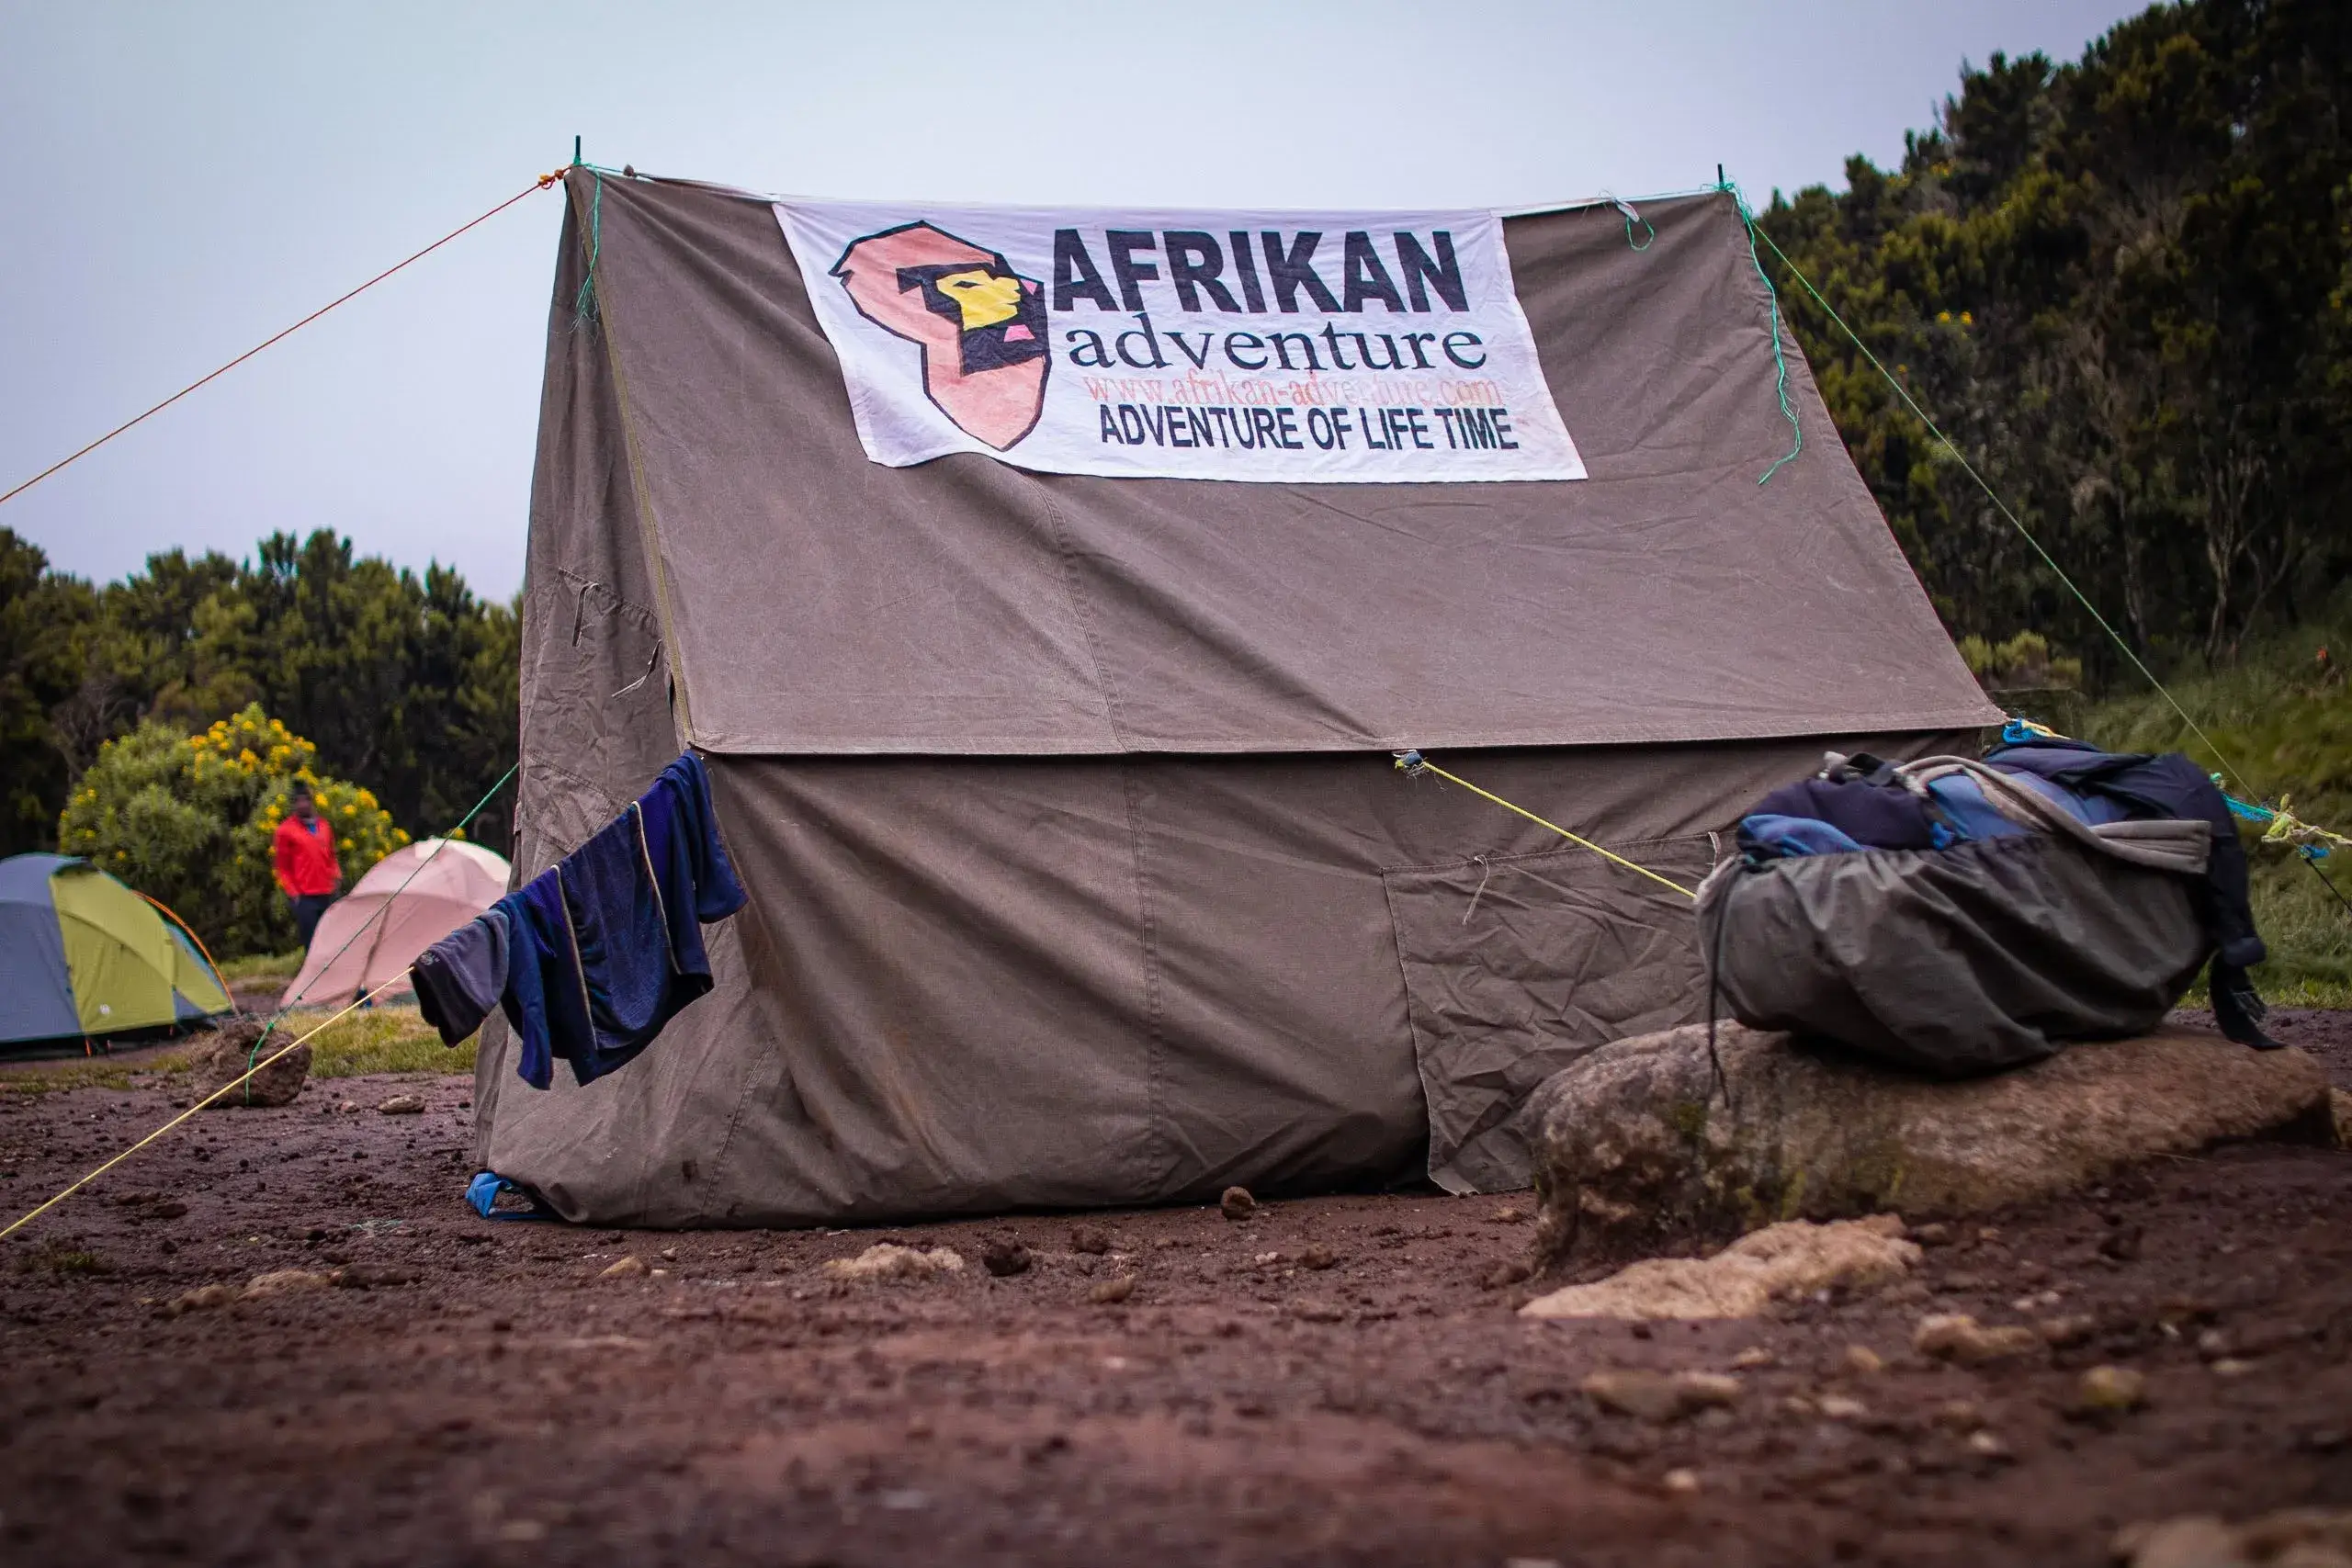 Early morning view of Camping tents of afrikan adventures in treks.